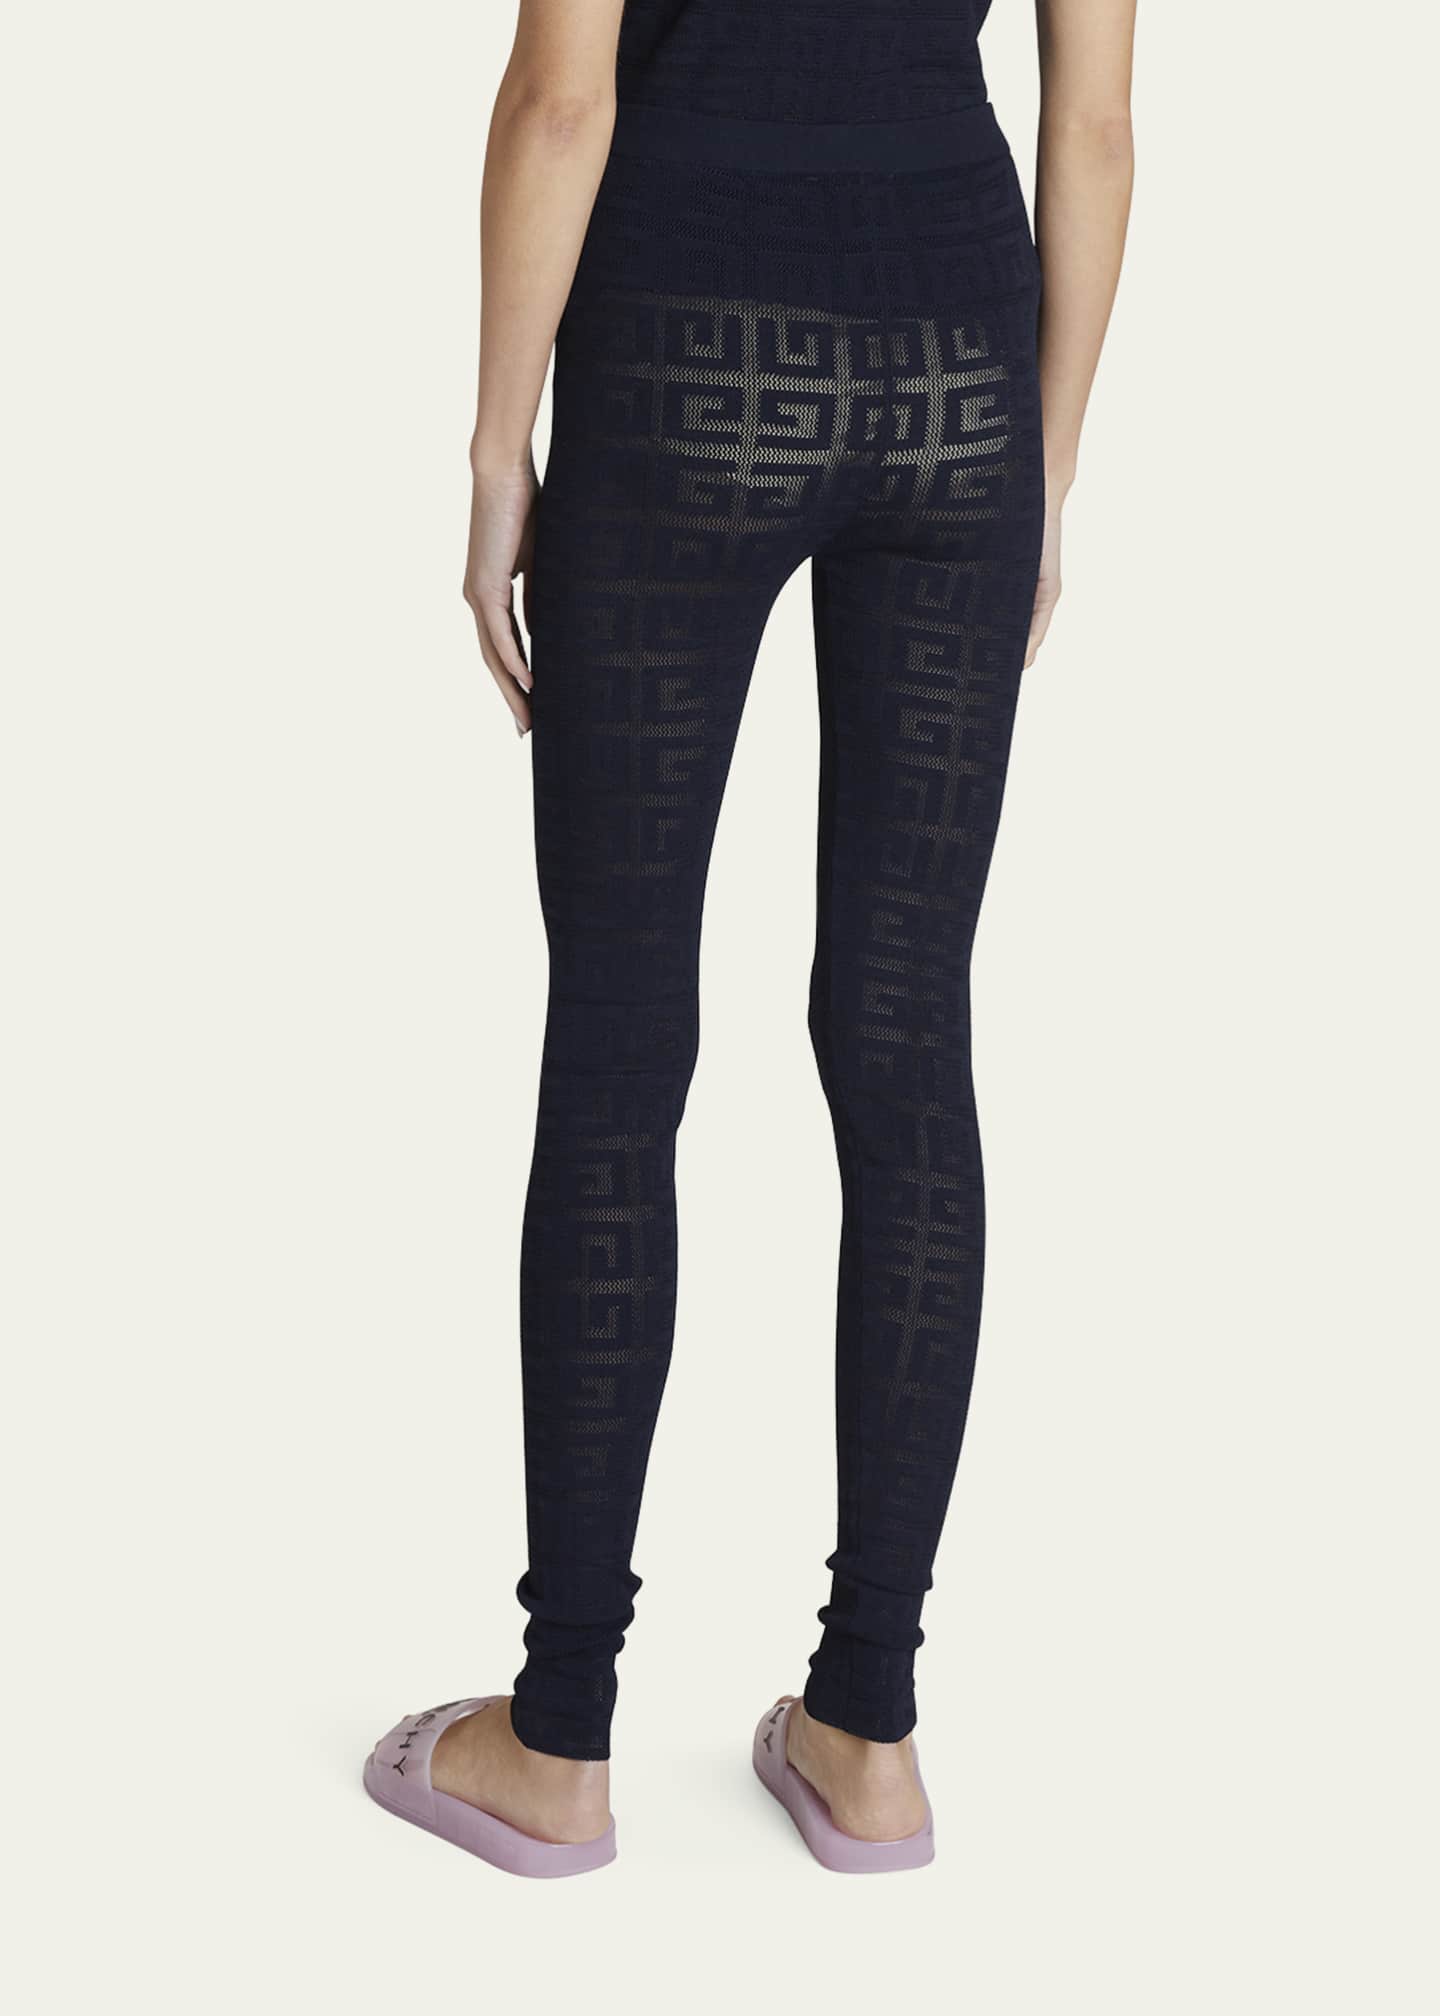 Brown Embroidered Leggings by Givenchy on Sale